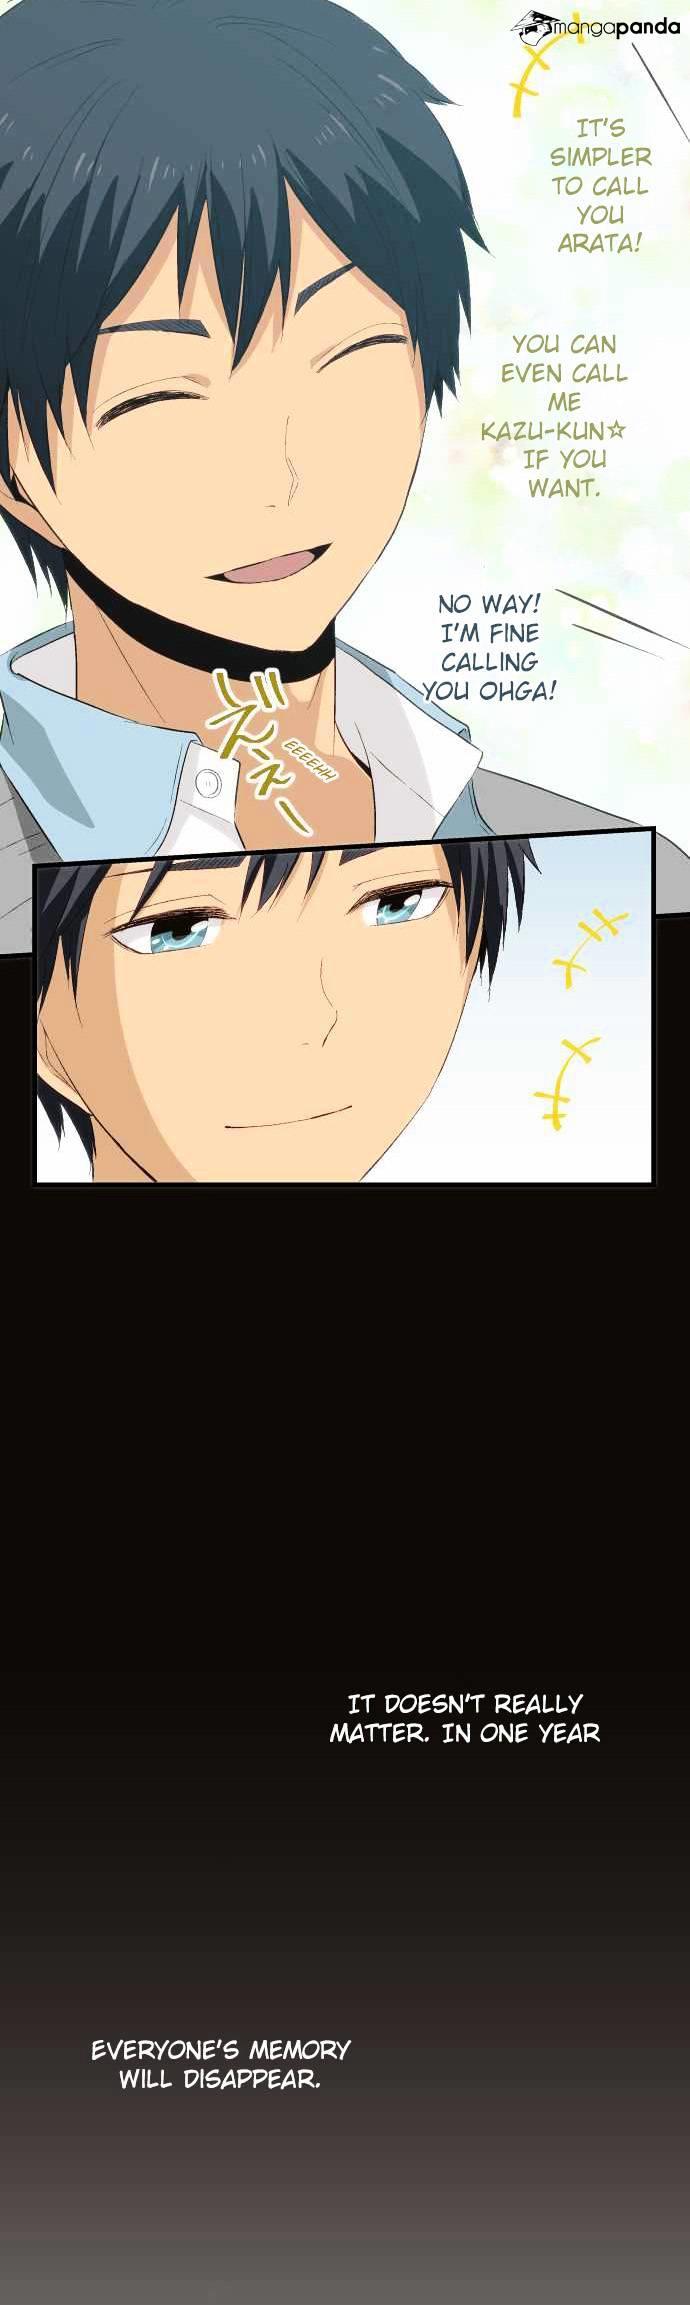 Relife player. Арата Кайзаки.